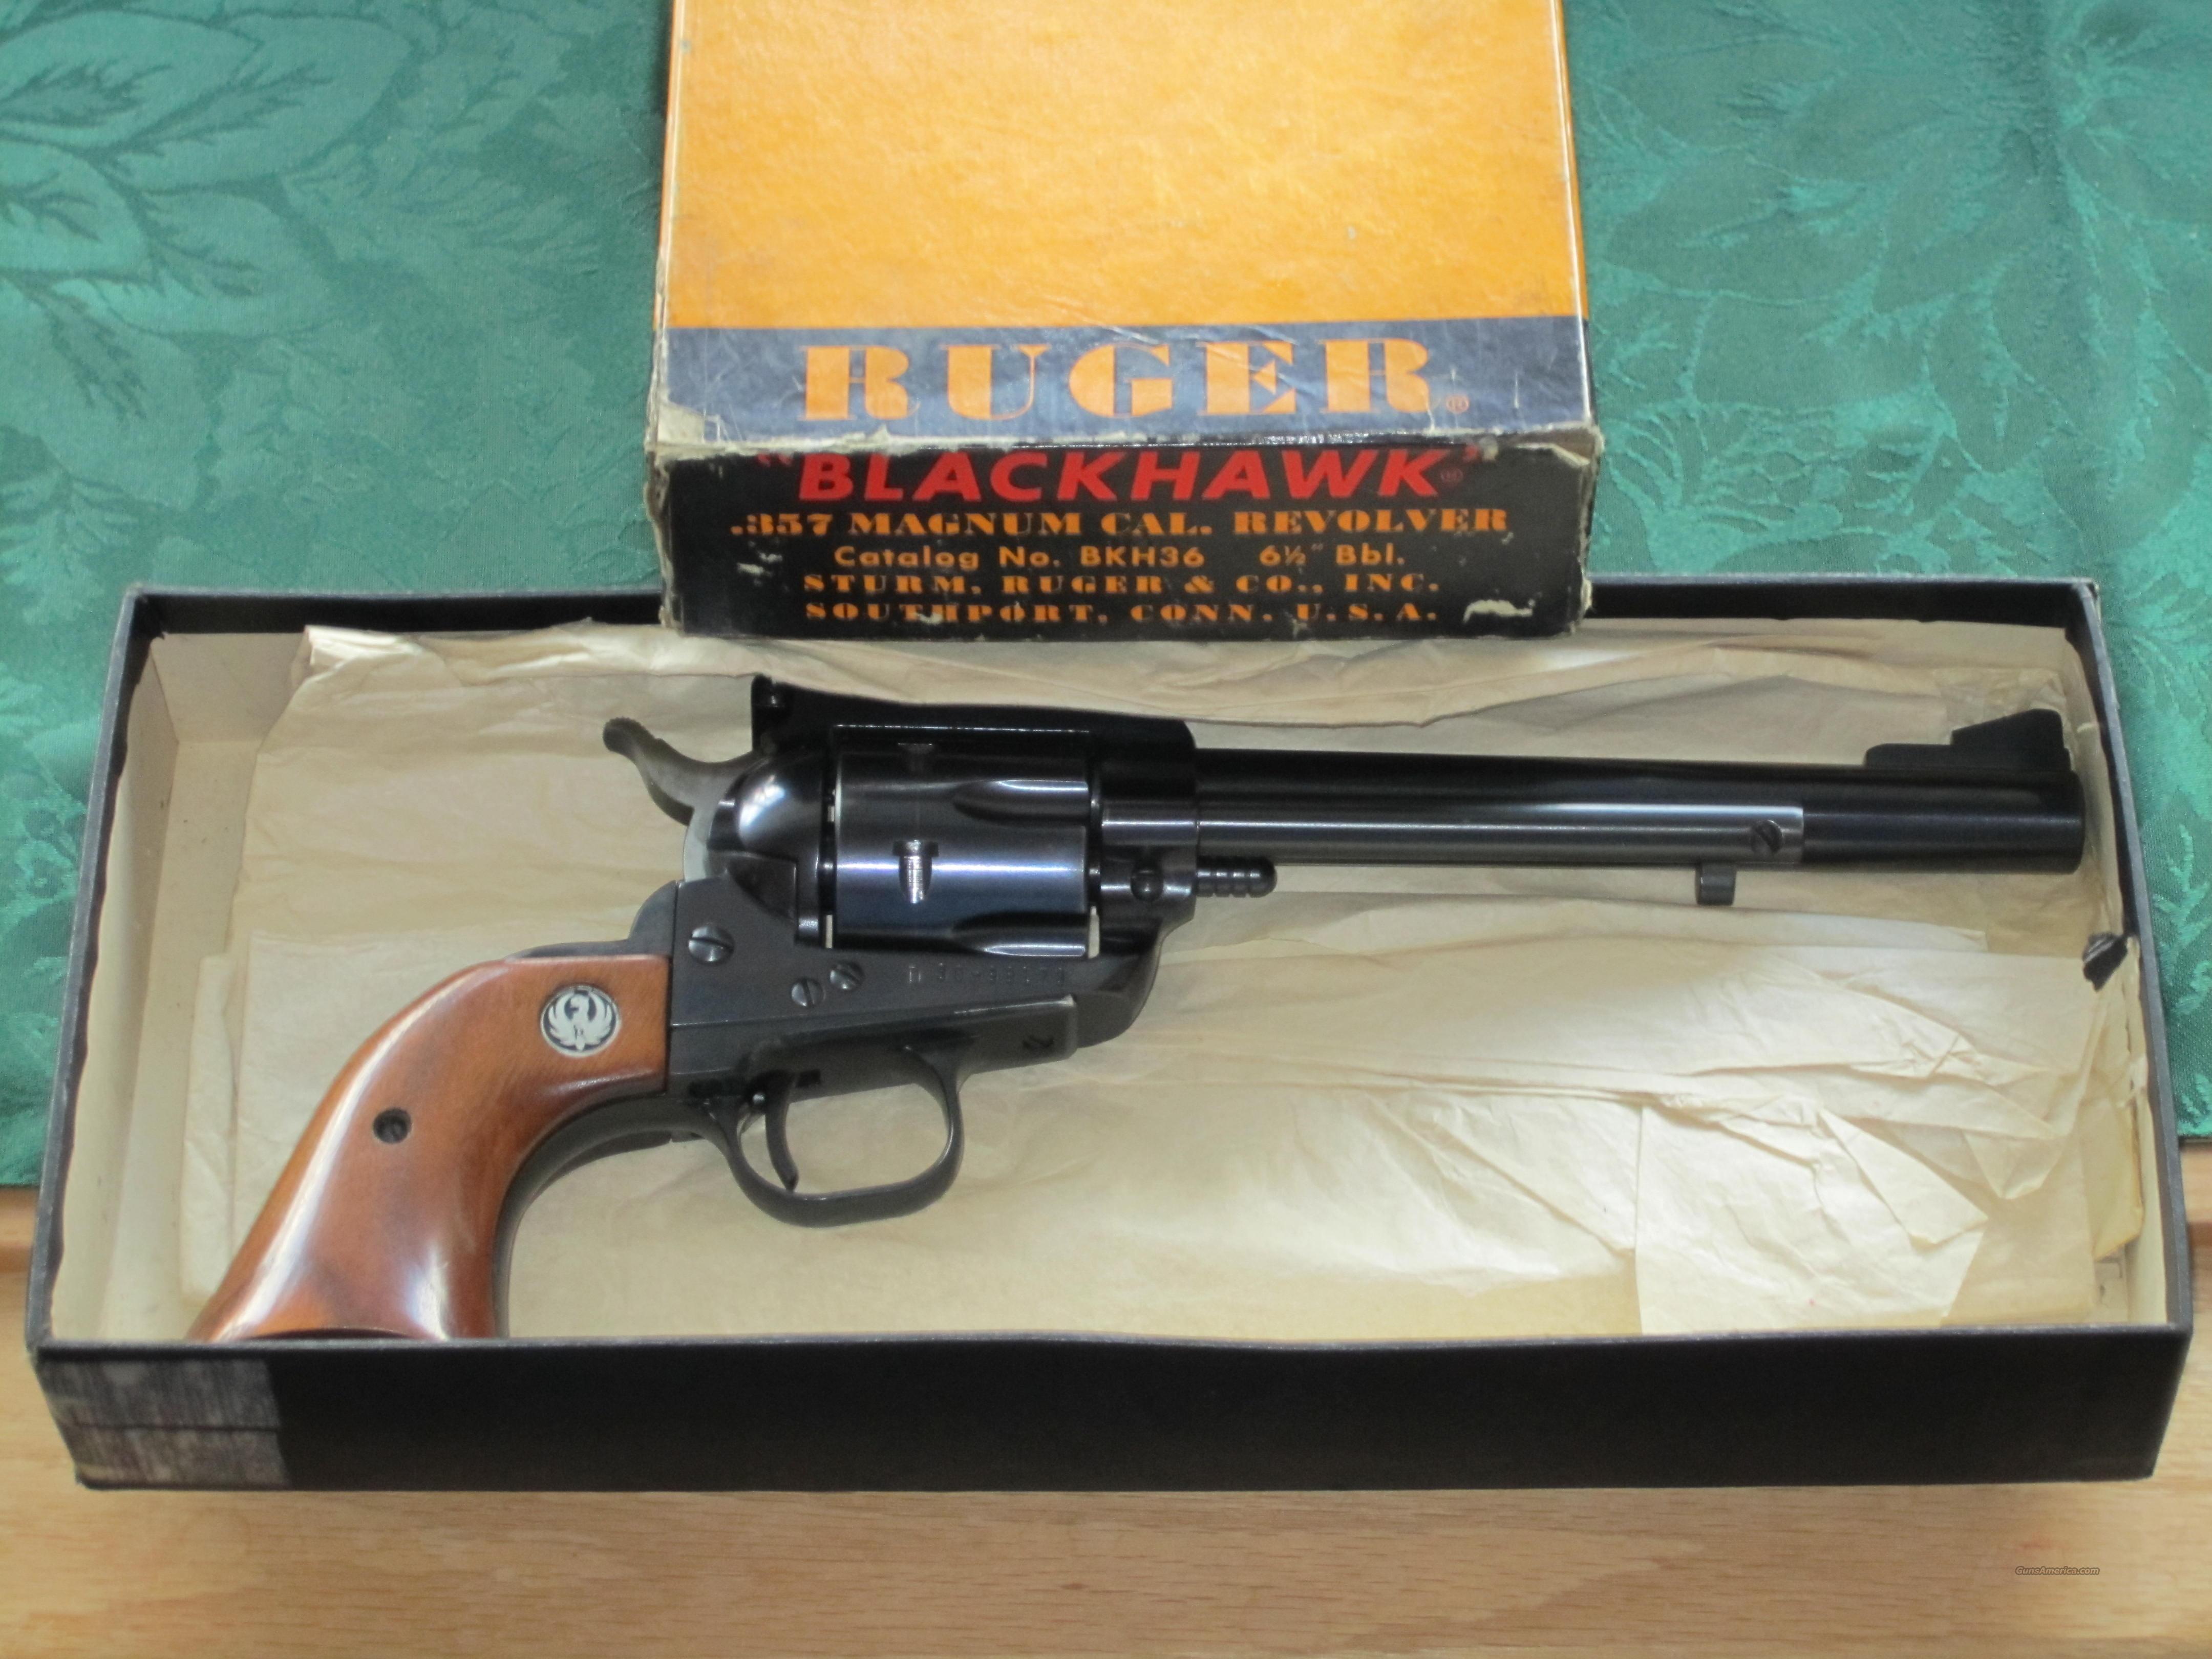 Ruger blackhawk 357 serial numbers by year manufactured